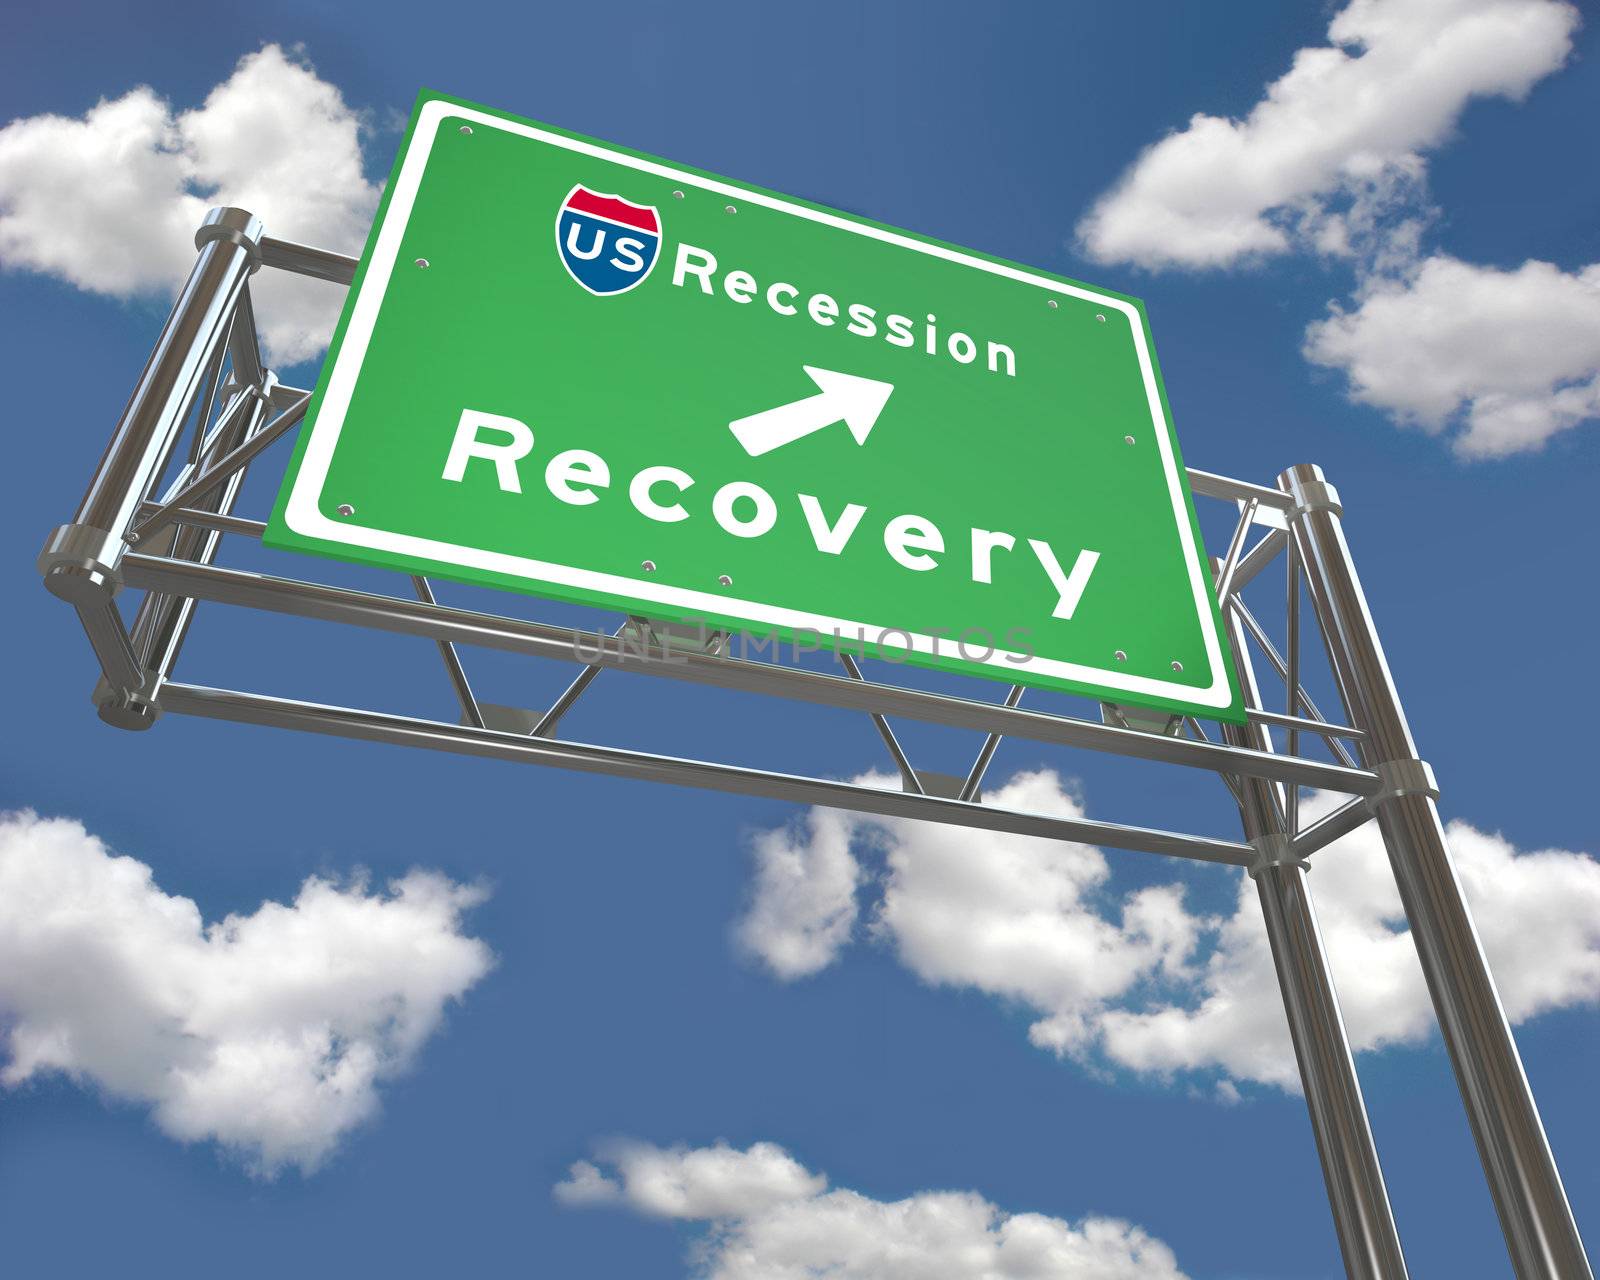 A green freeway sign with the words US Recession with an arrow pointing to Recovery